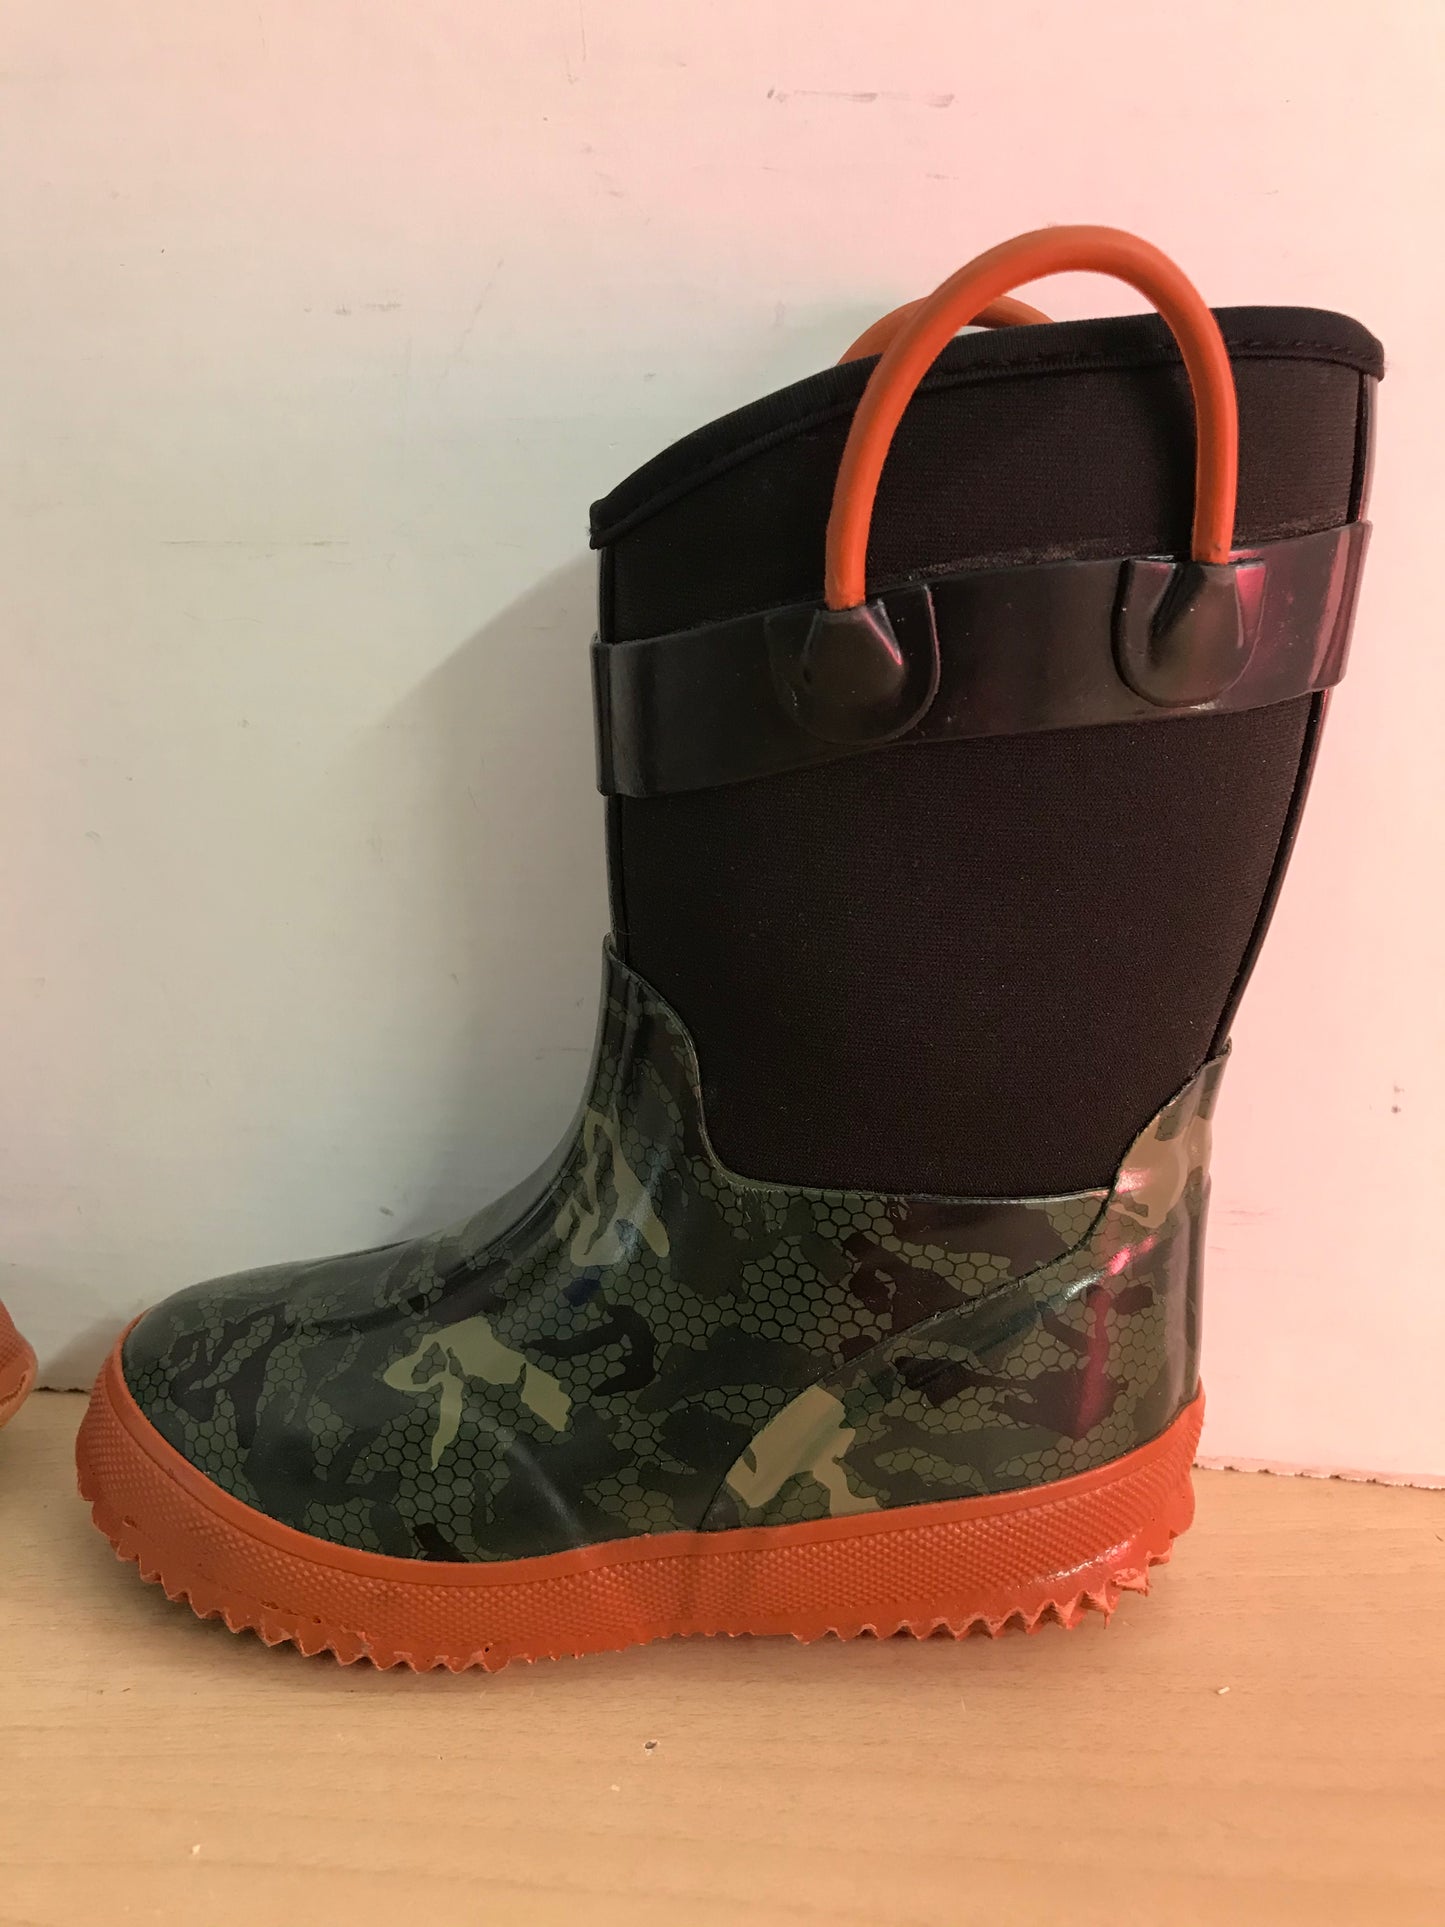 Bogs Style Child Size 8 Toddler Neoprene Rubber Rain Winter Boots Camo Black Green As New